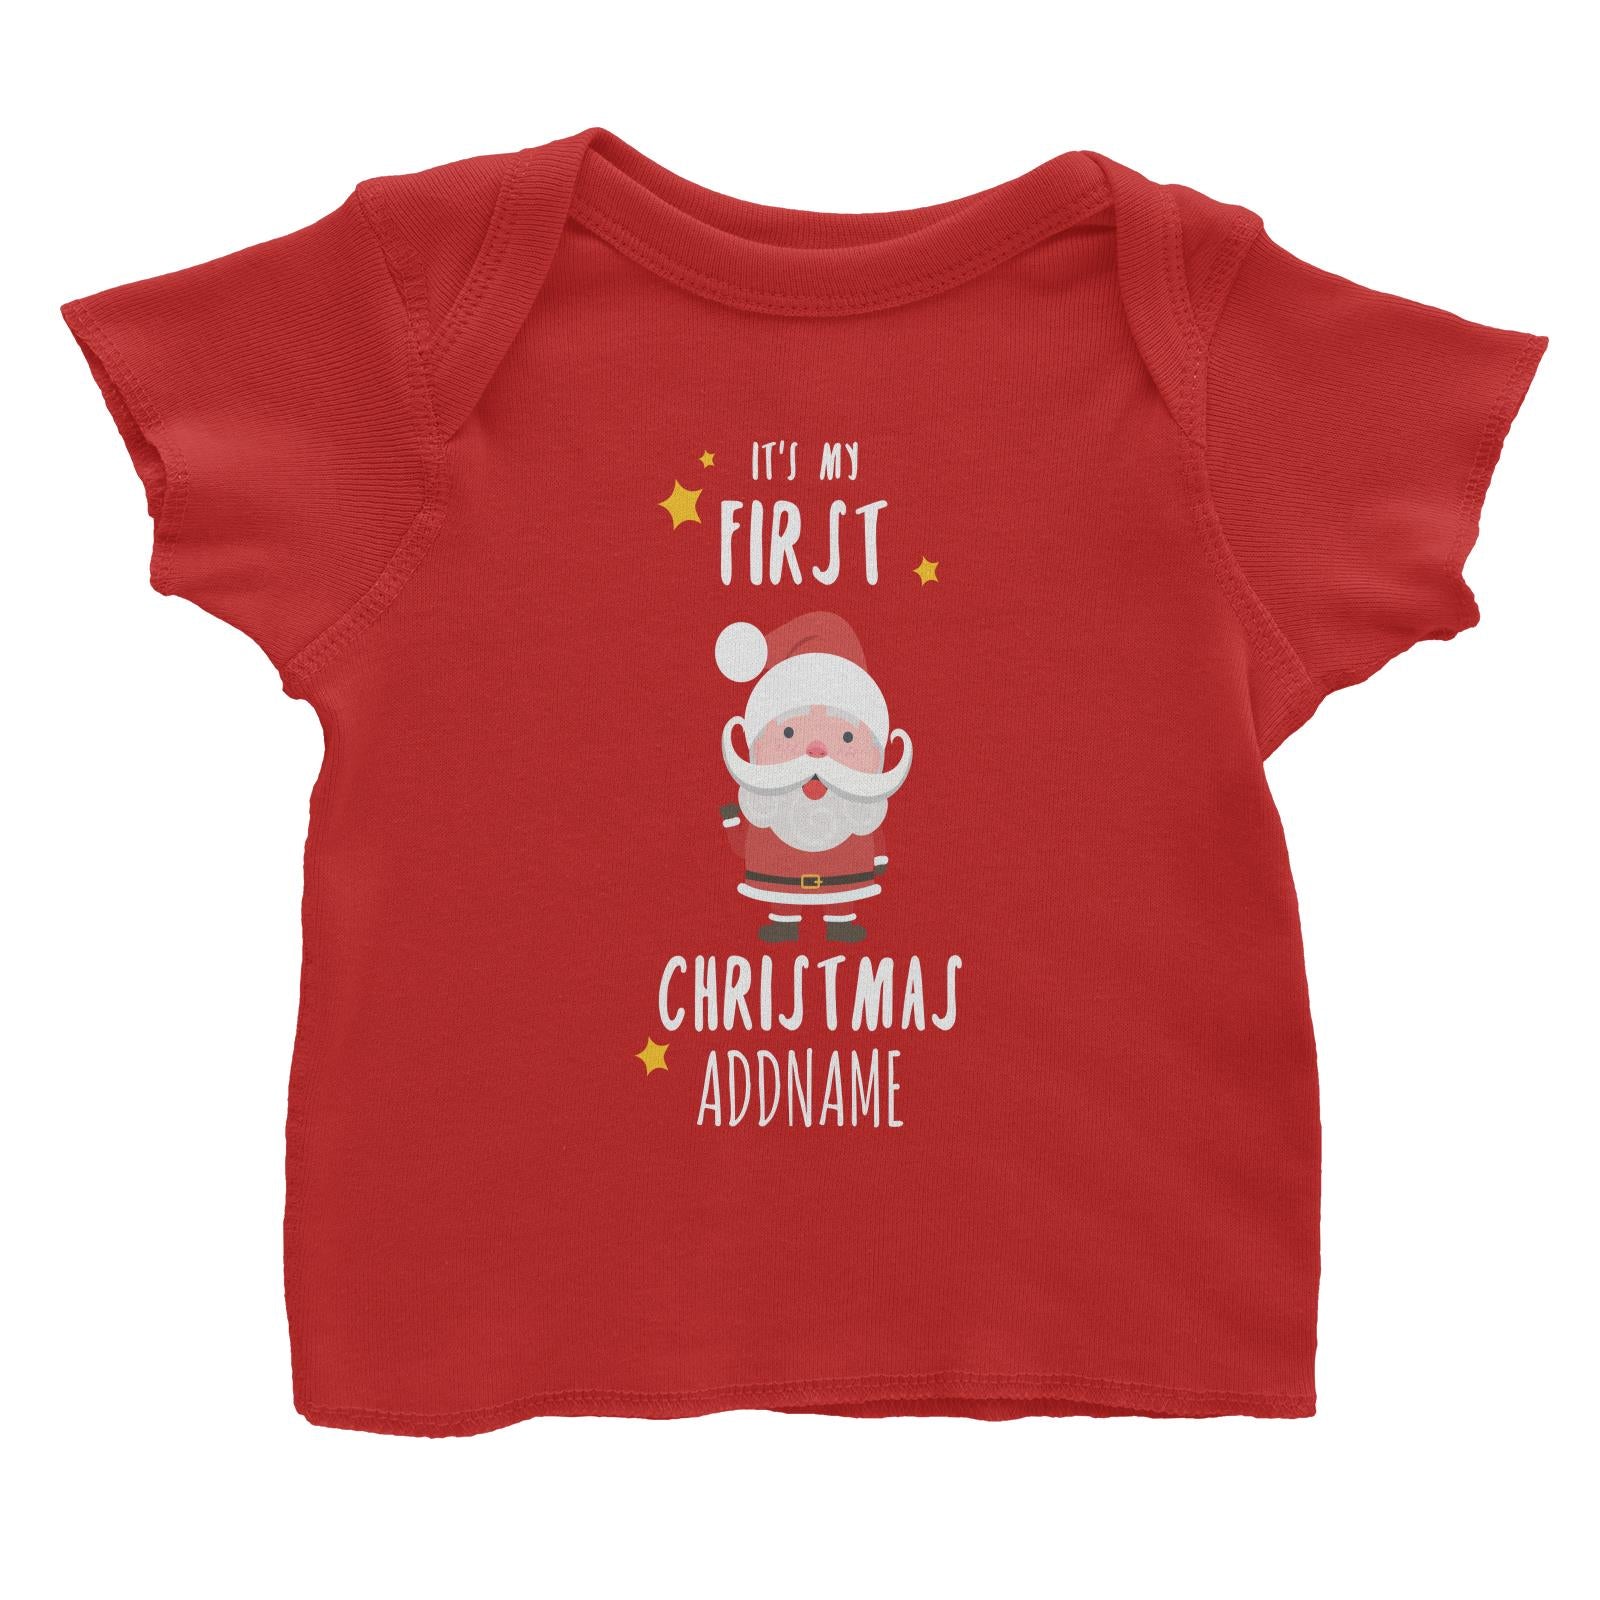 Cute Santa First Christmas Addname Baby T-Shirt  Personalizable Designs